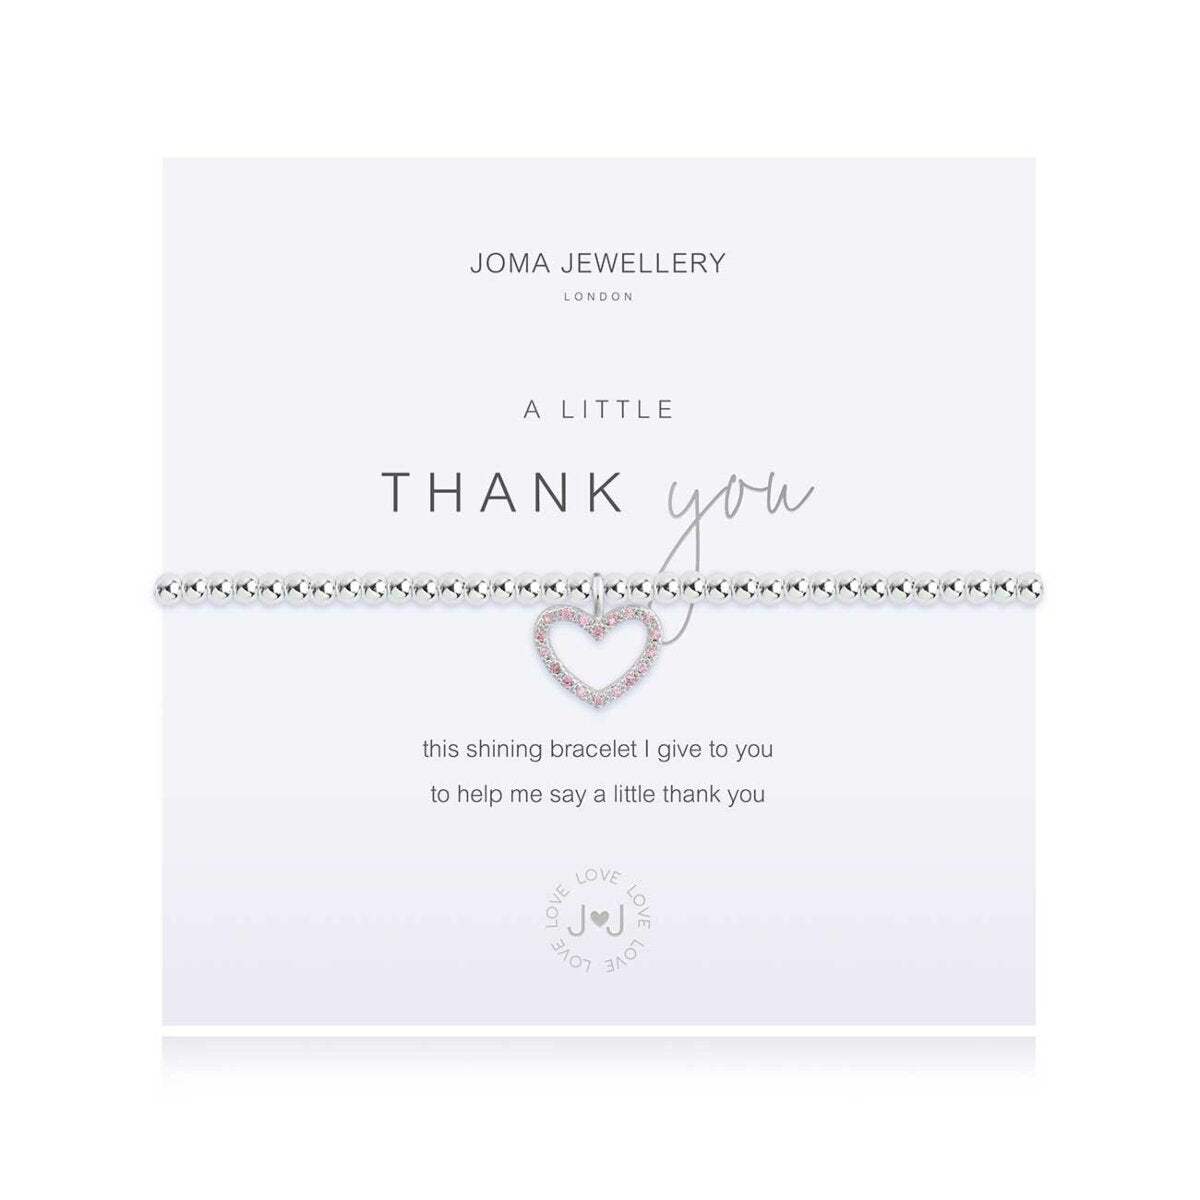 Joma Jewellery 'A Little' Thank You